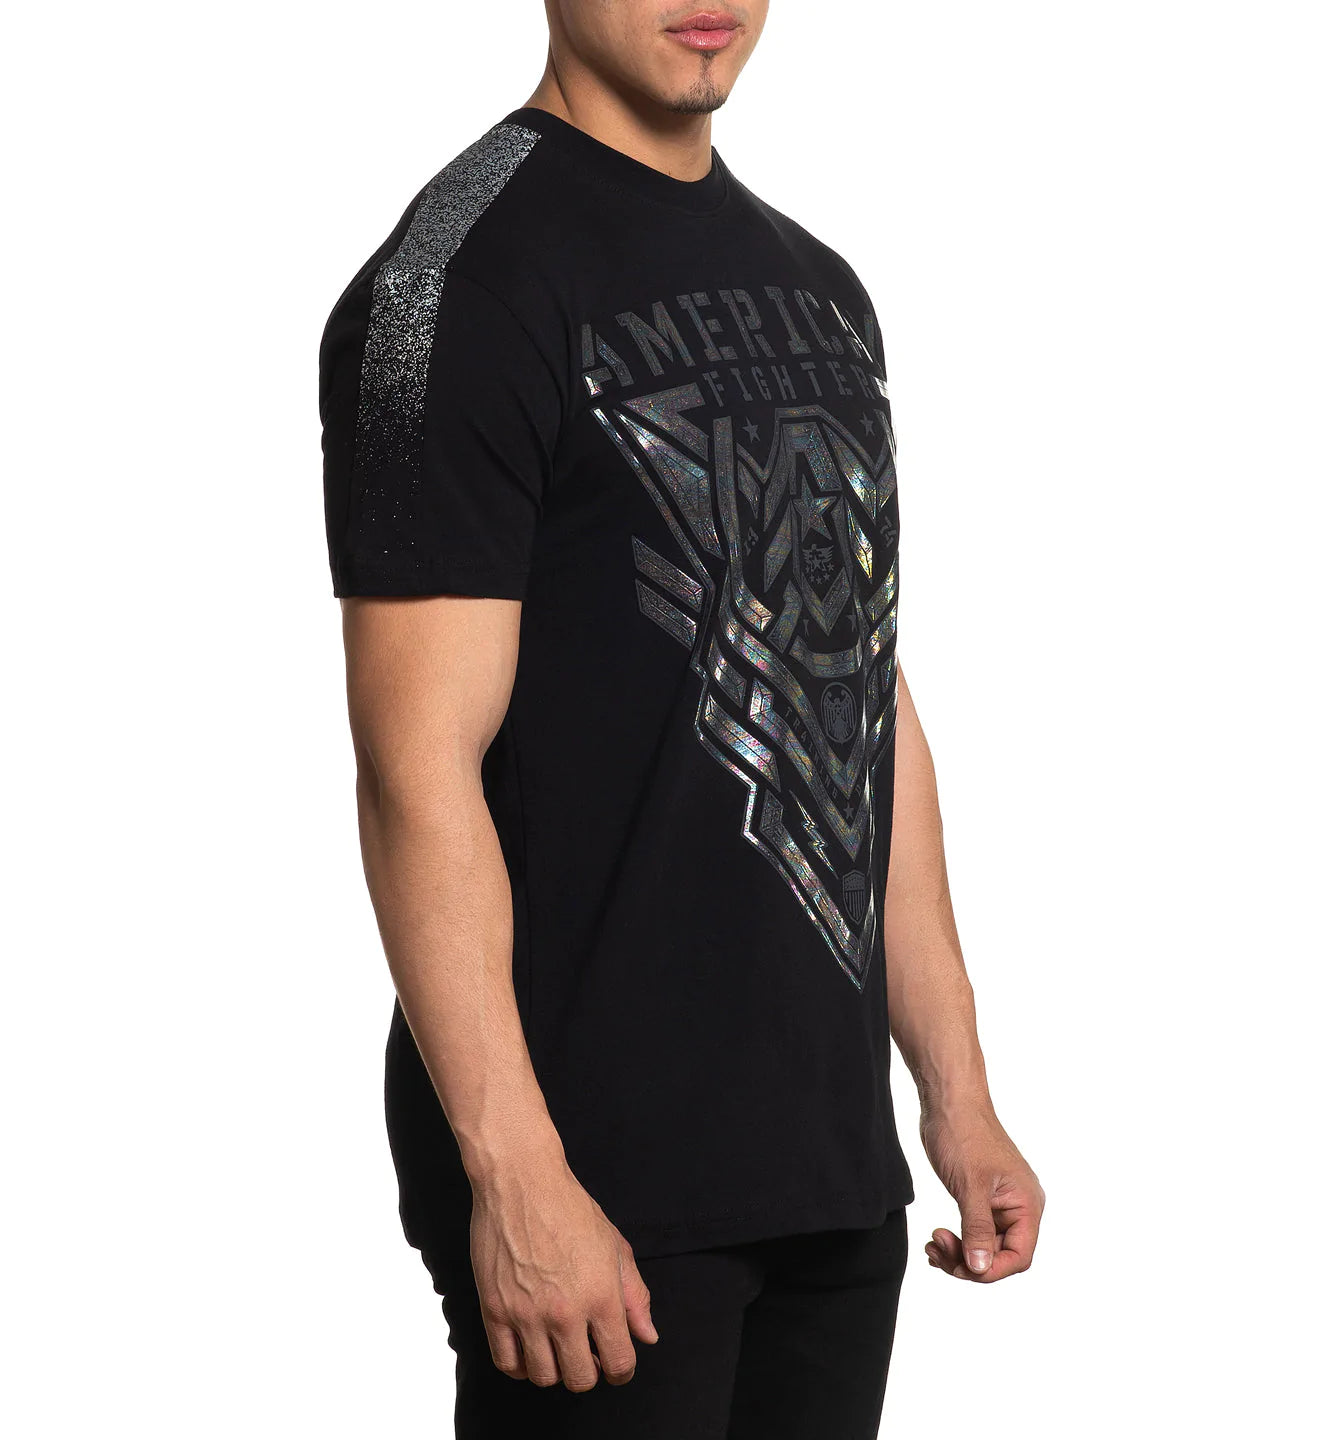 AMERICAN FIGHTER AREDALE TEE CHARCOAL